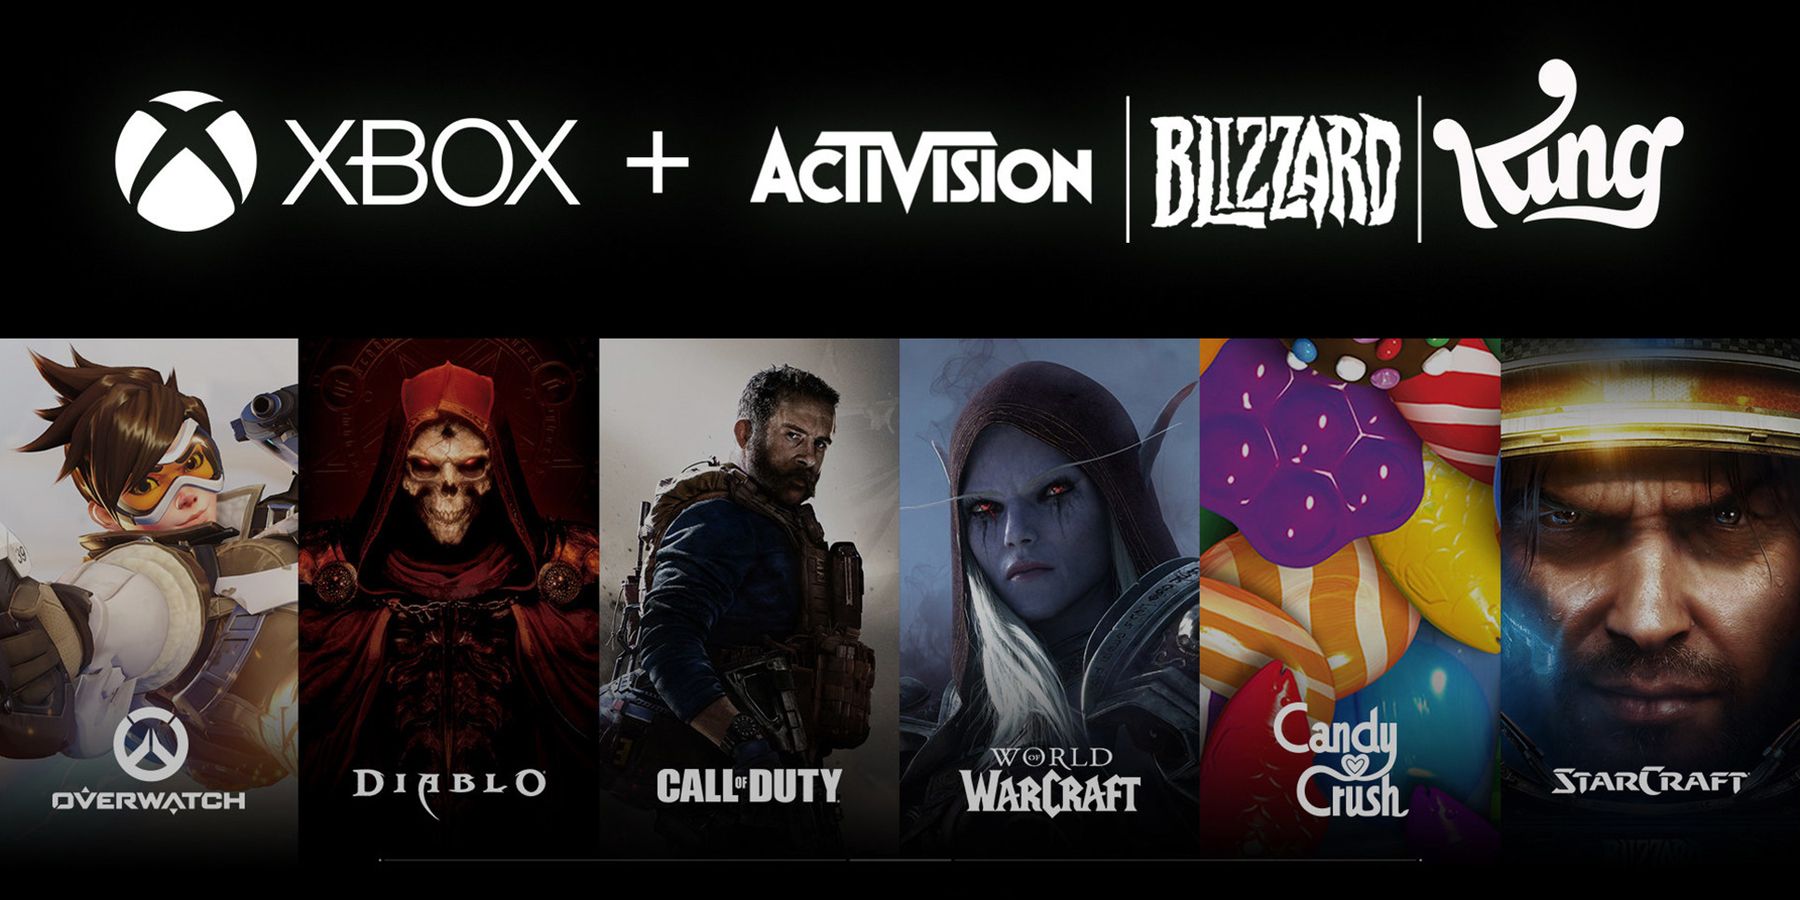 xbox activision blizzard king lineup